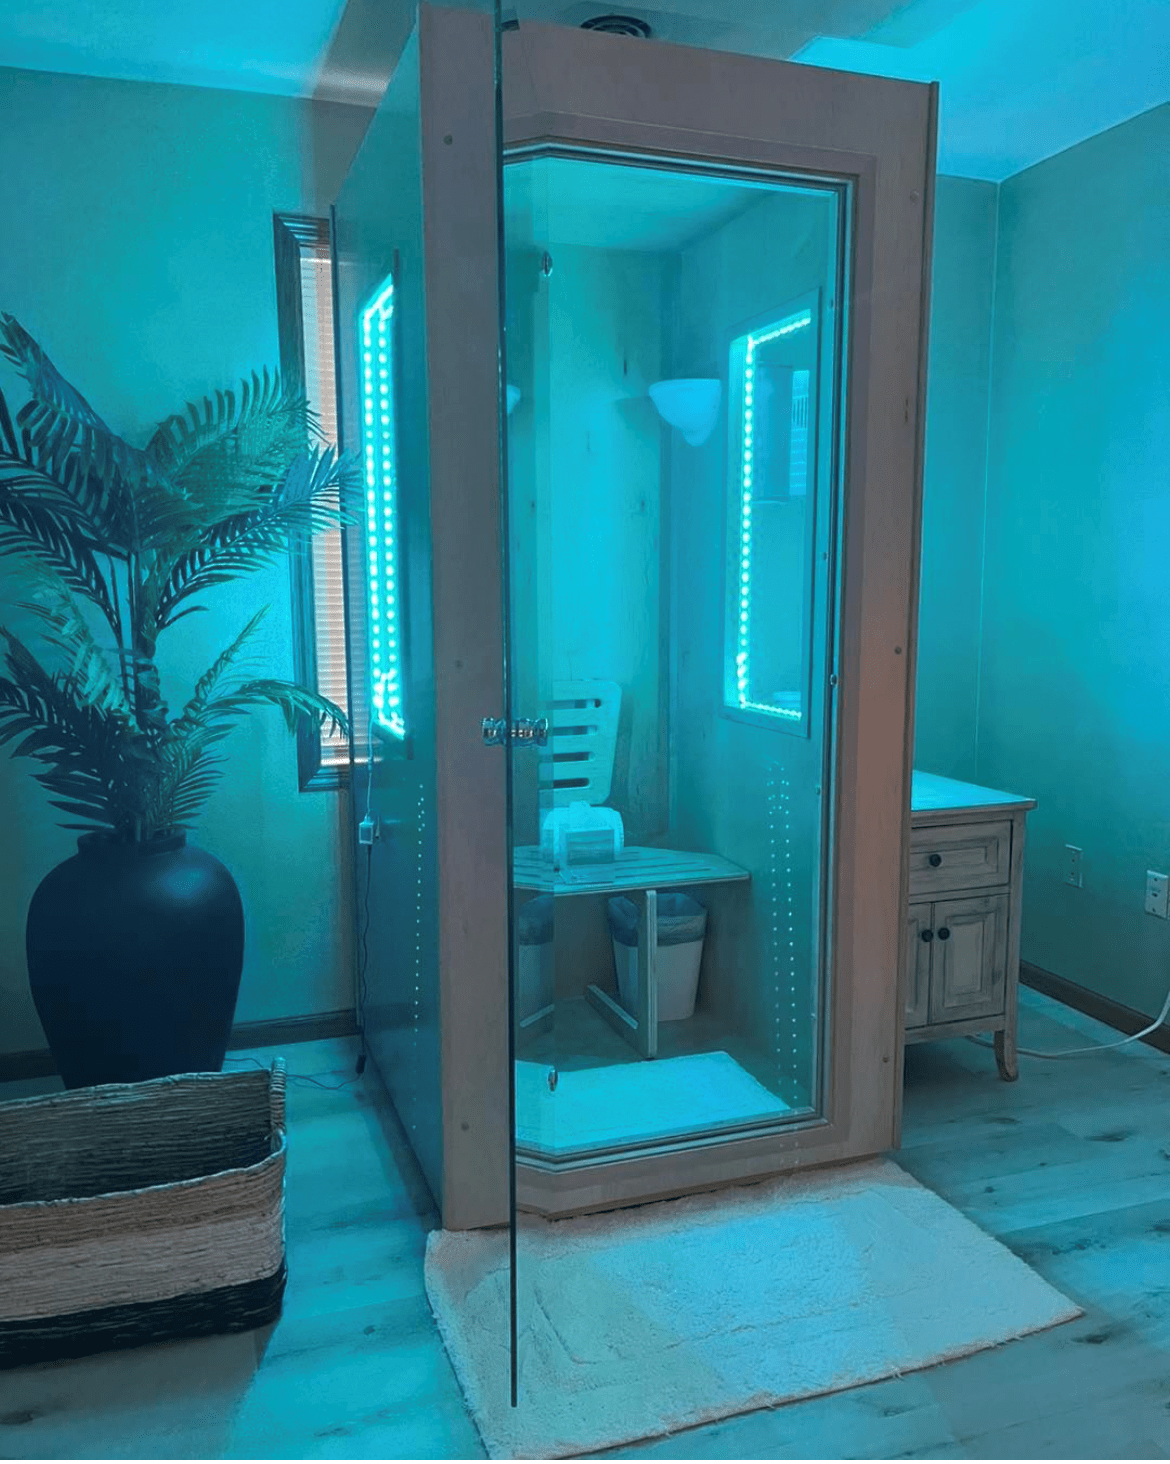 The SALT Booth® FleX used for 10-minute salt therapy sessions at Beyond Salt Spa in Janesville, Wisconsin.